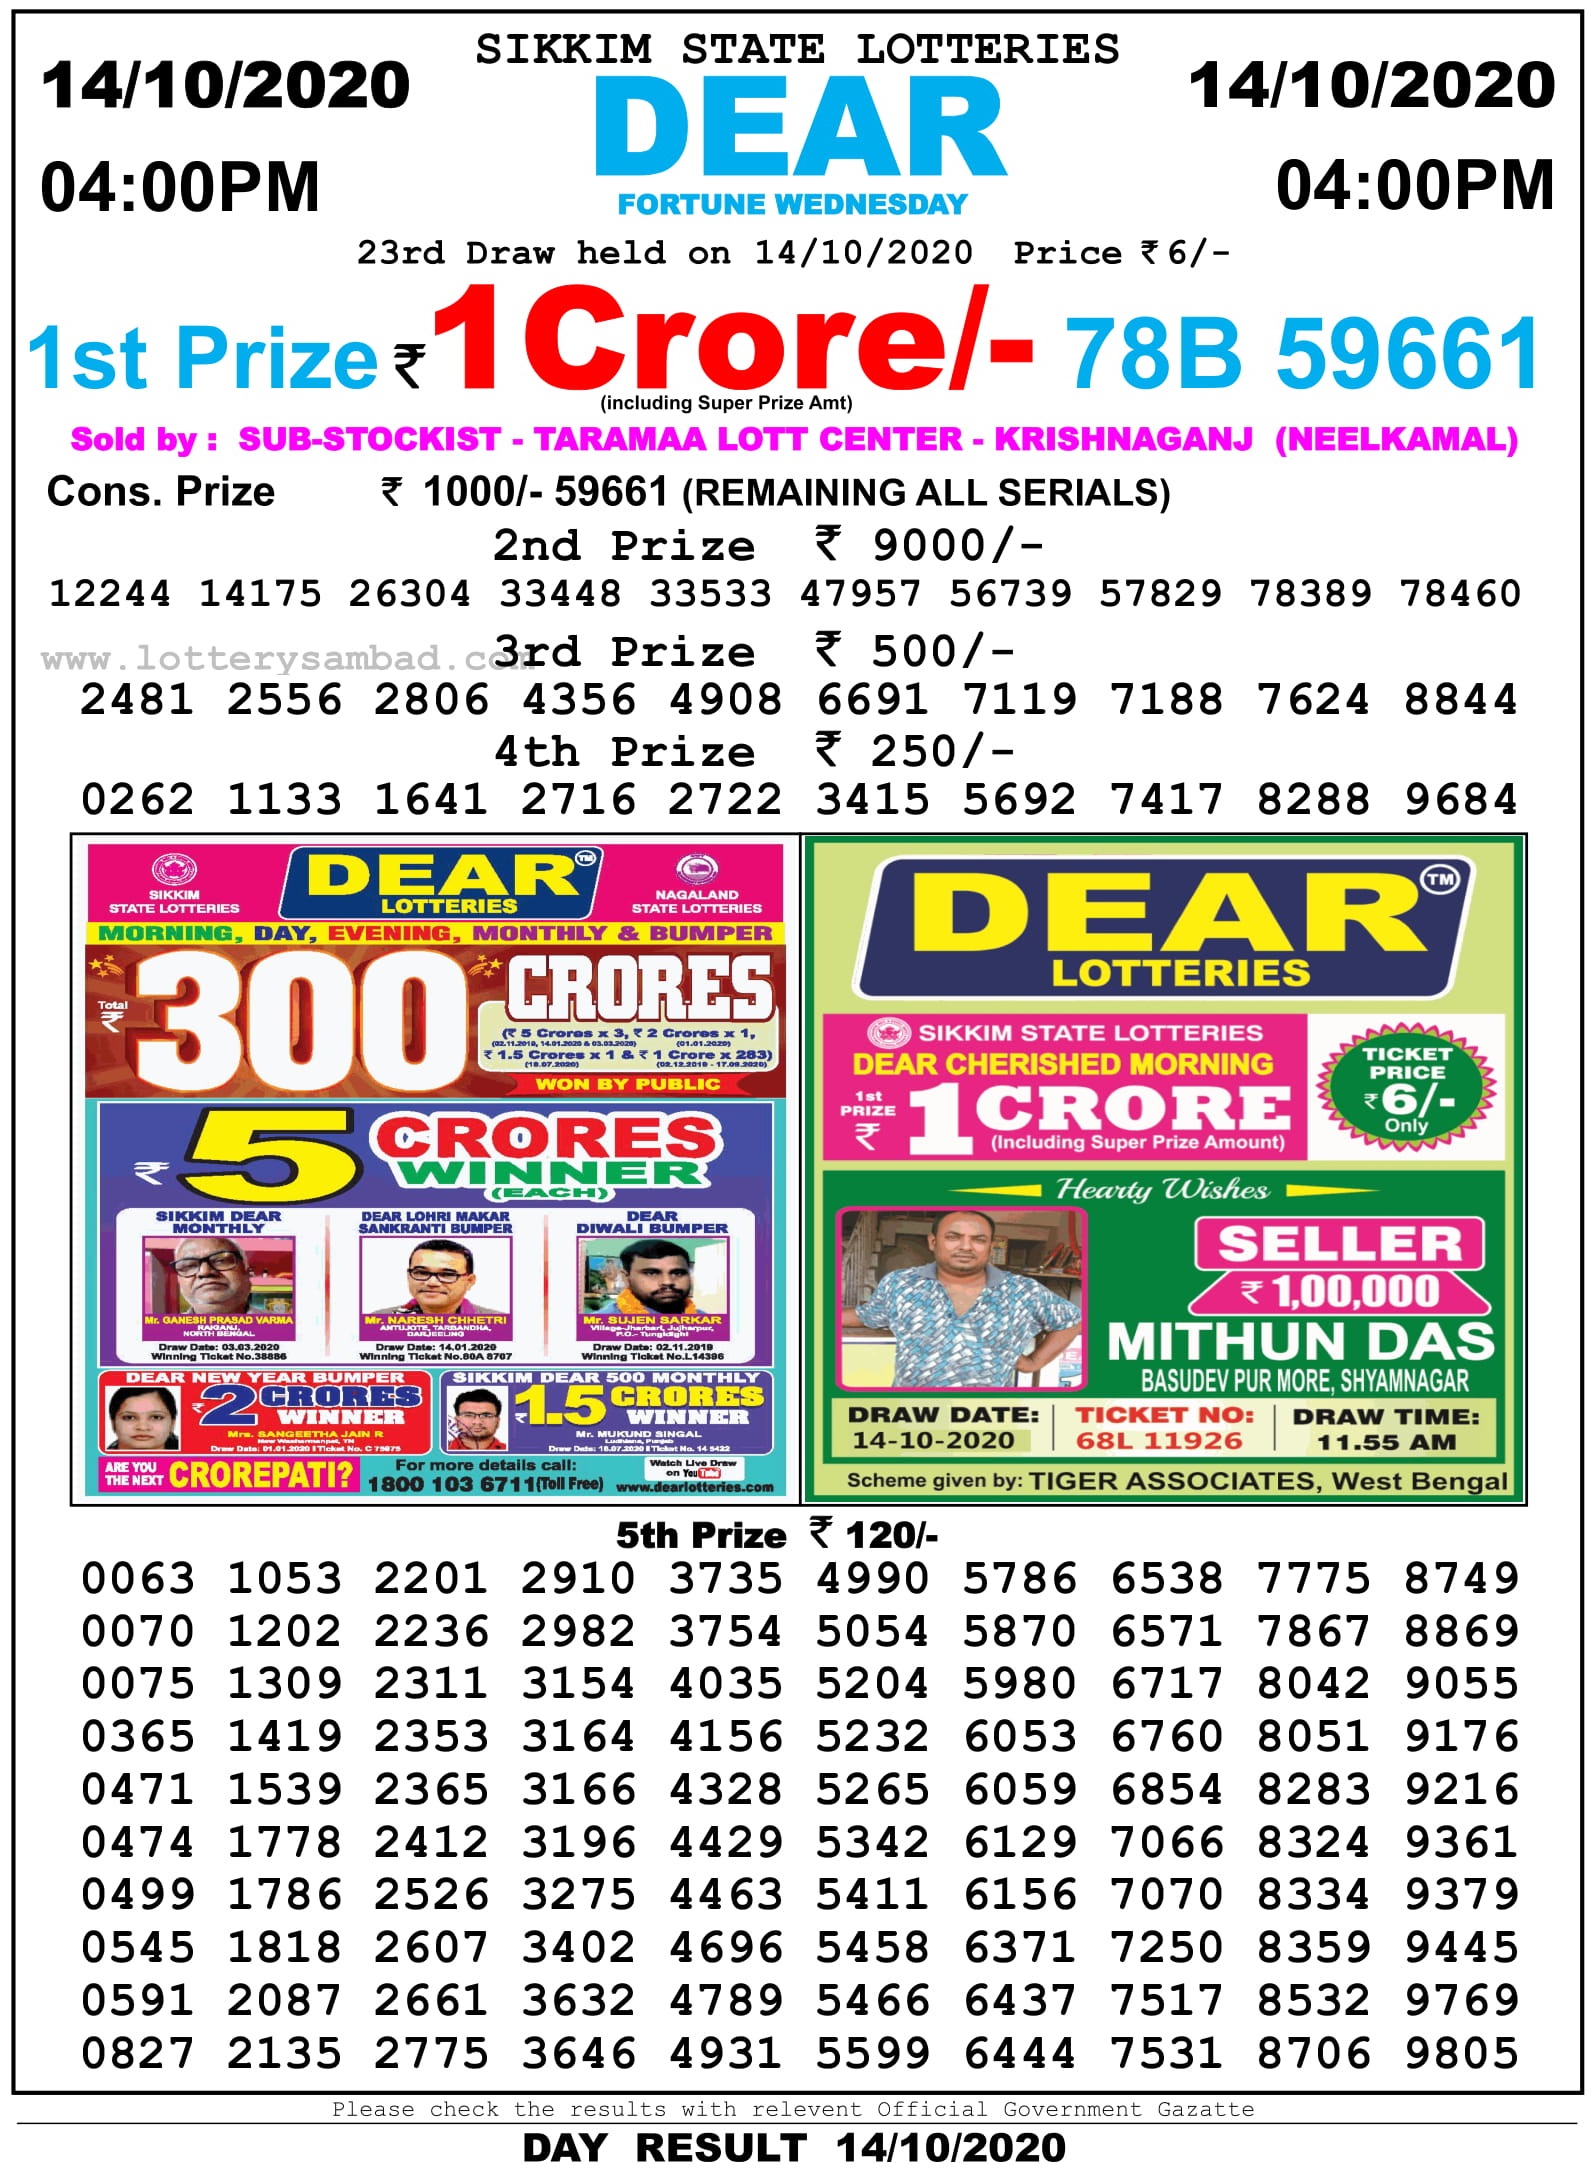 Sikkim State Lottery Result 4 PM 14.10.2020